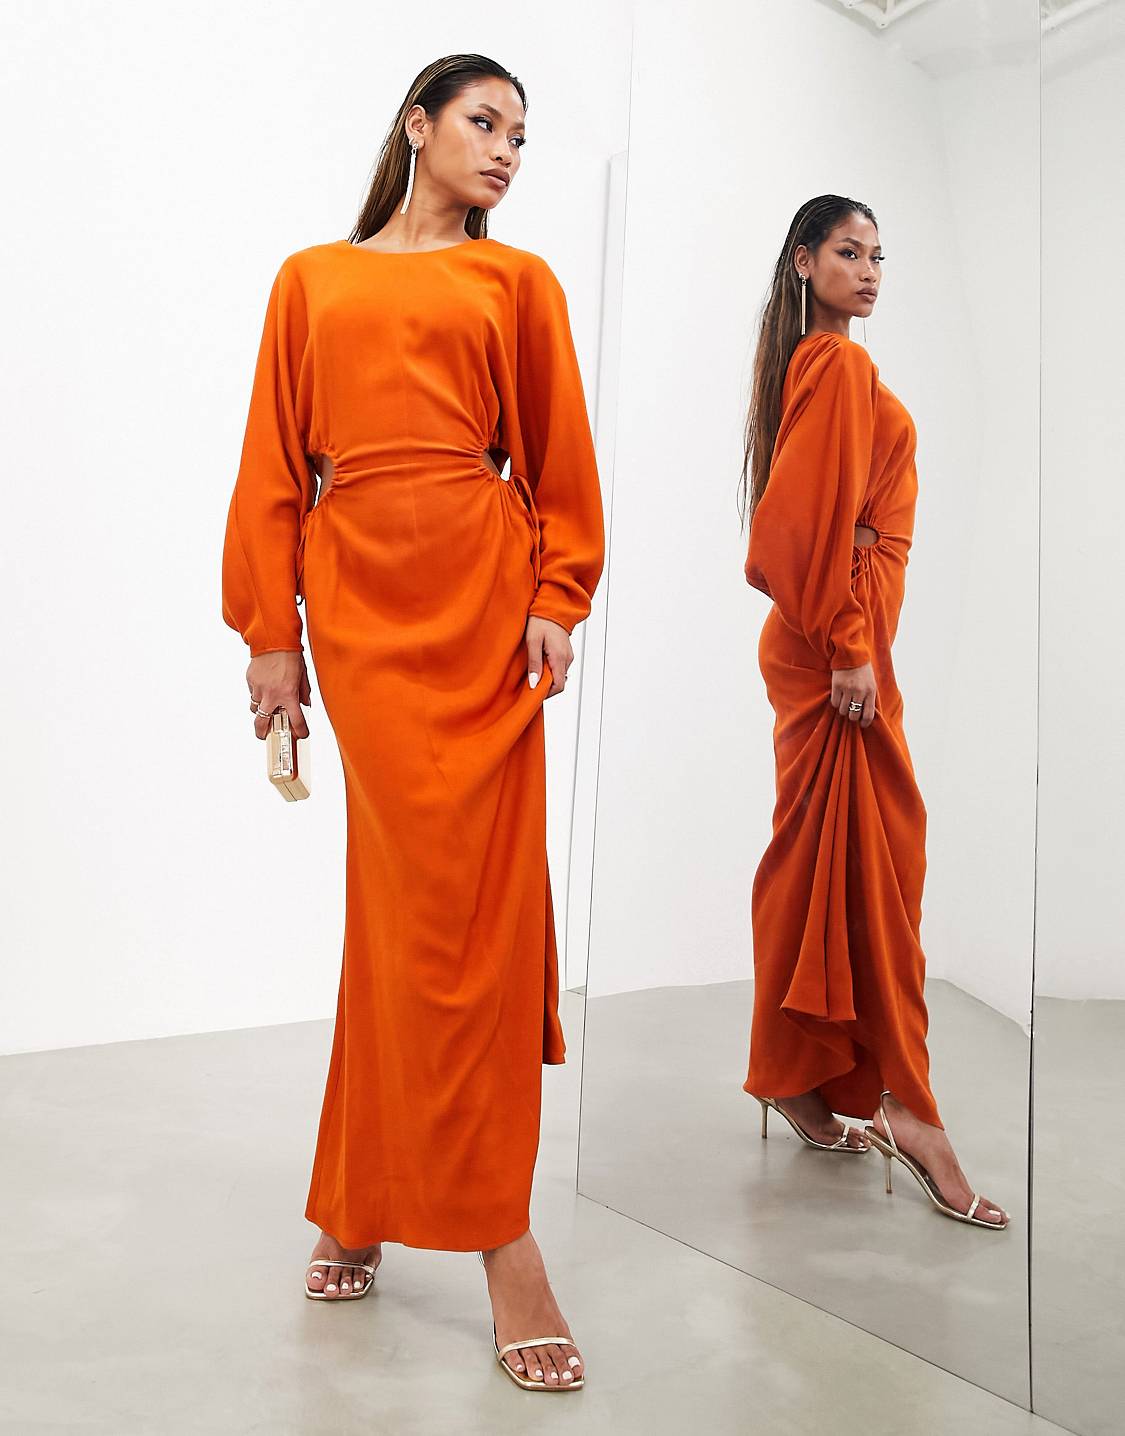 ASOS EDITION ruched side cowl back maxi dress in rust, £95